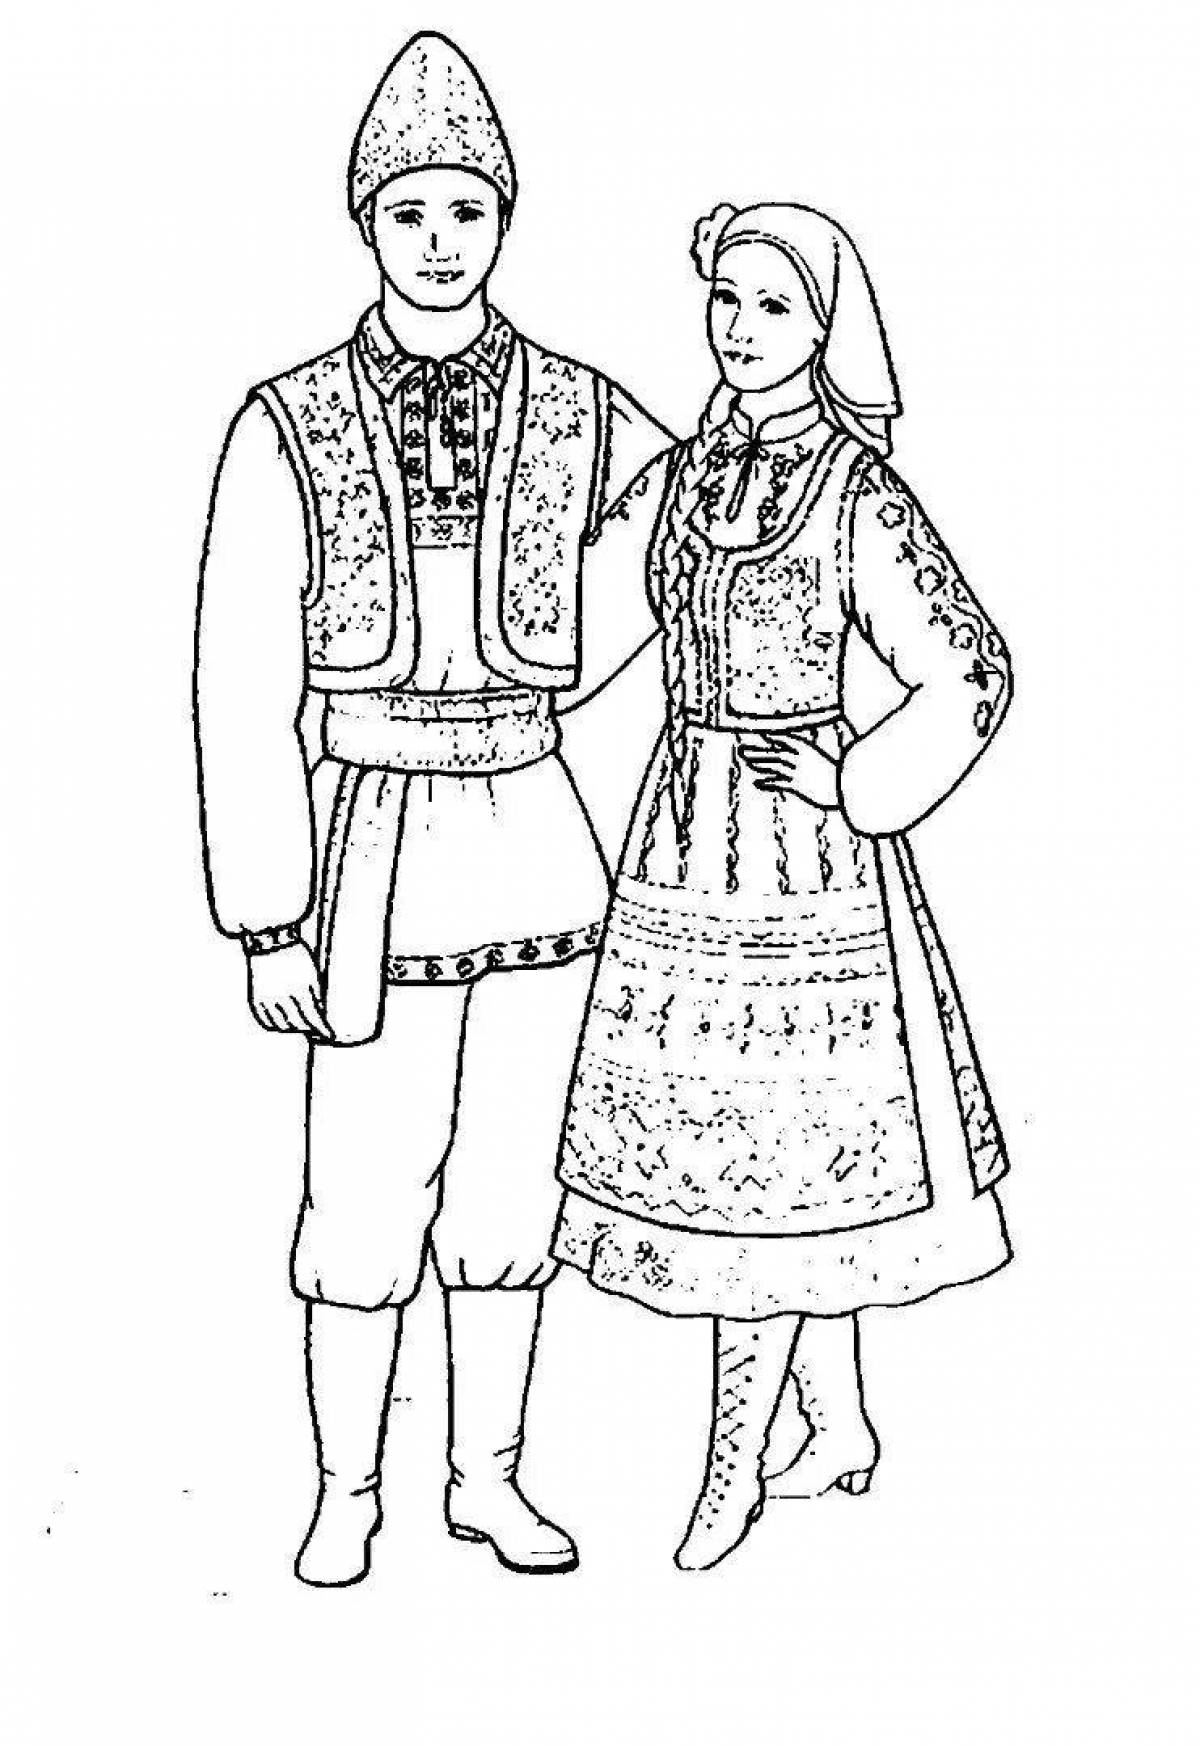 Coloring pages of folk costumes for children